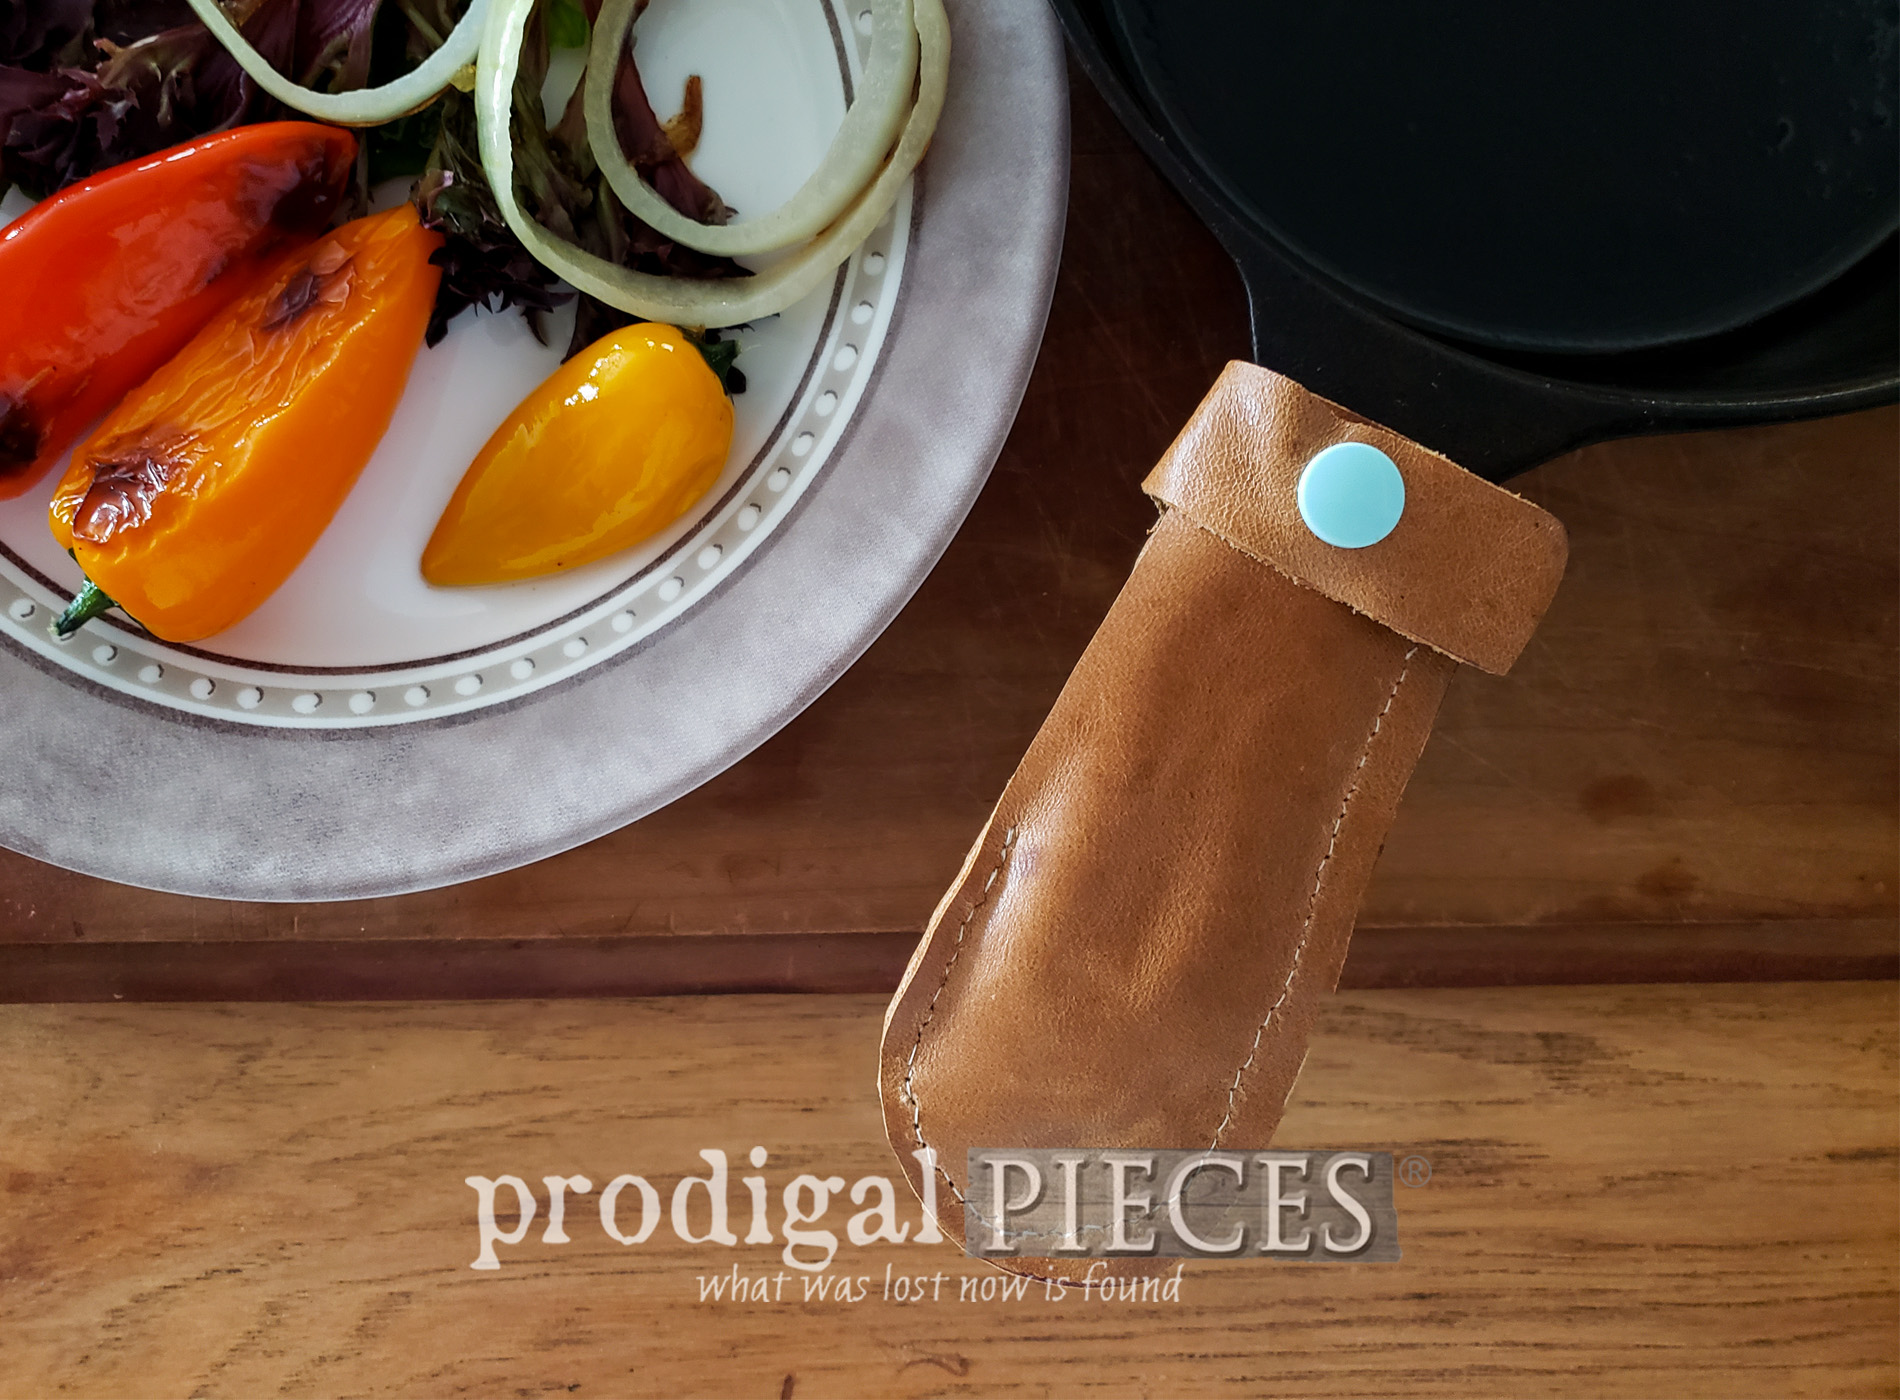 Featured Upcycled Leather Pot Holder from Old Purse with Video Tutorial by Larissa of Prodigal Pieces | prodigalpieces.com #prodigalpieces #diy #home #kitchen #cooking #handmade